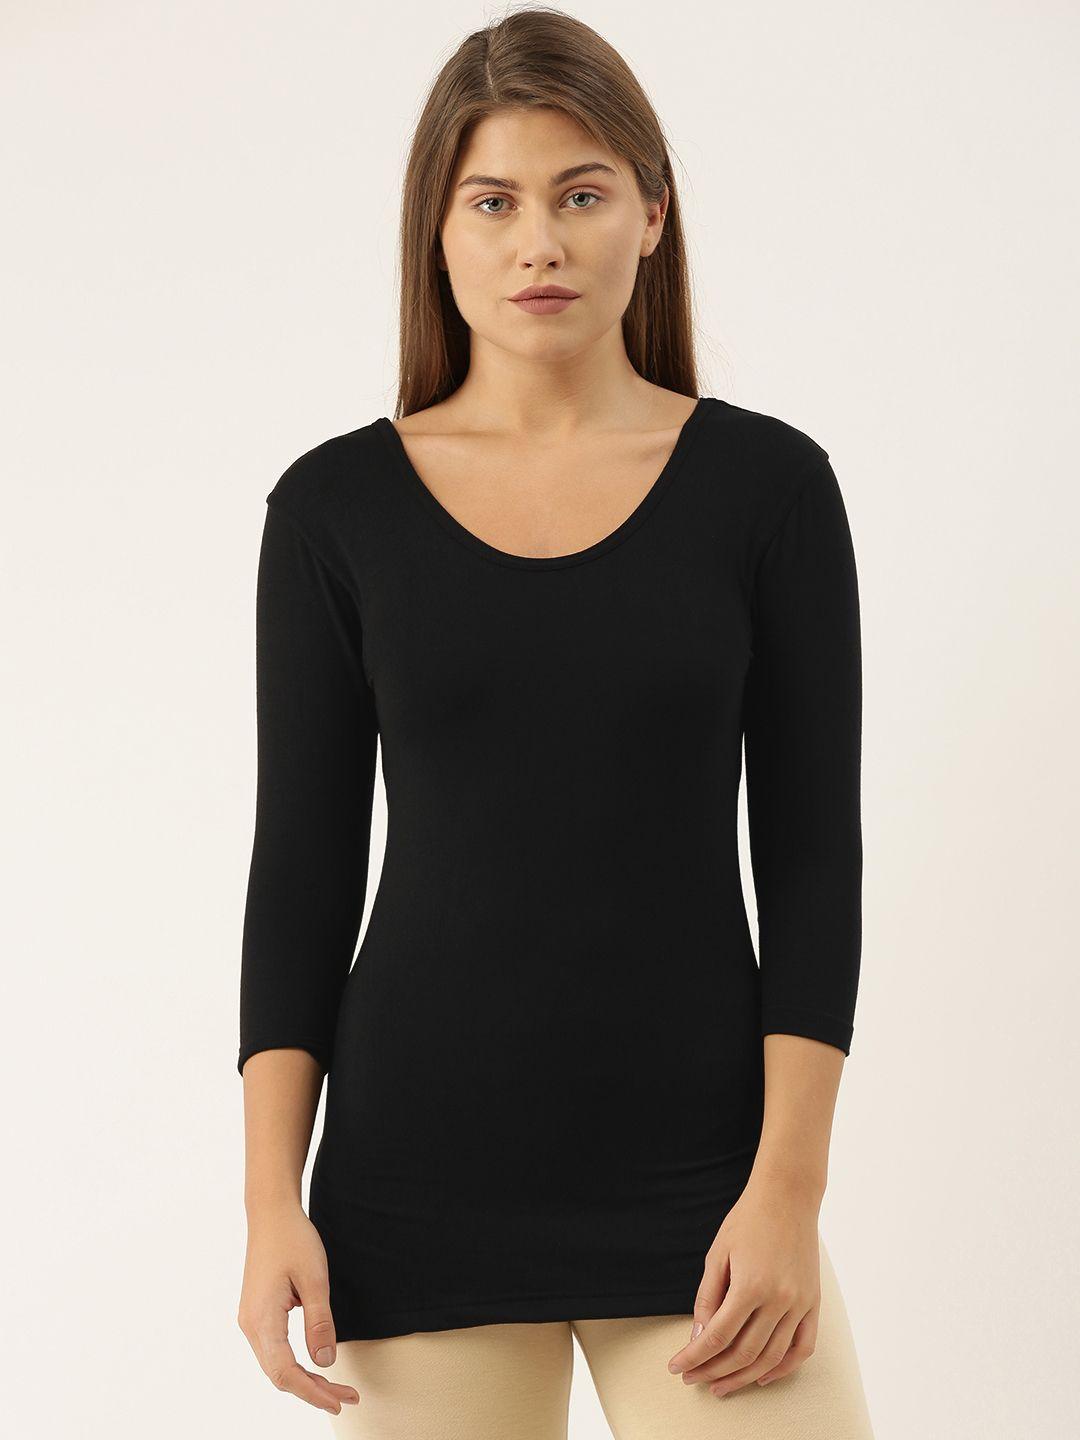 fruit of the loom woman's black solid thermal top